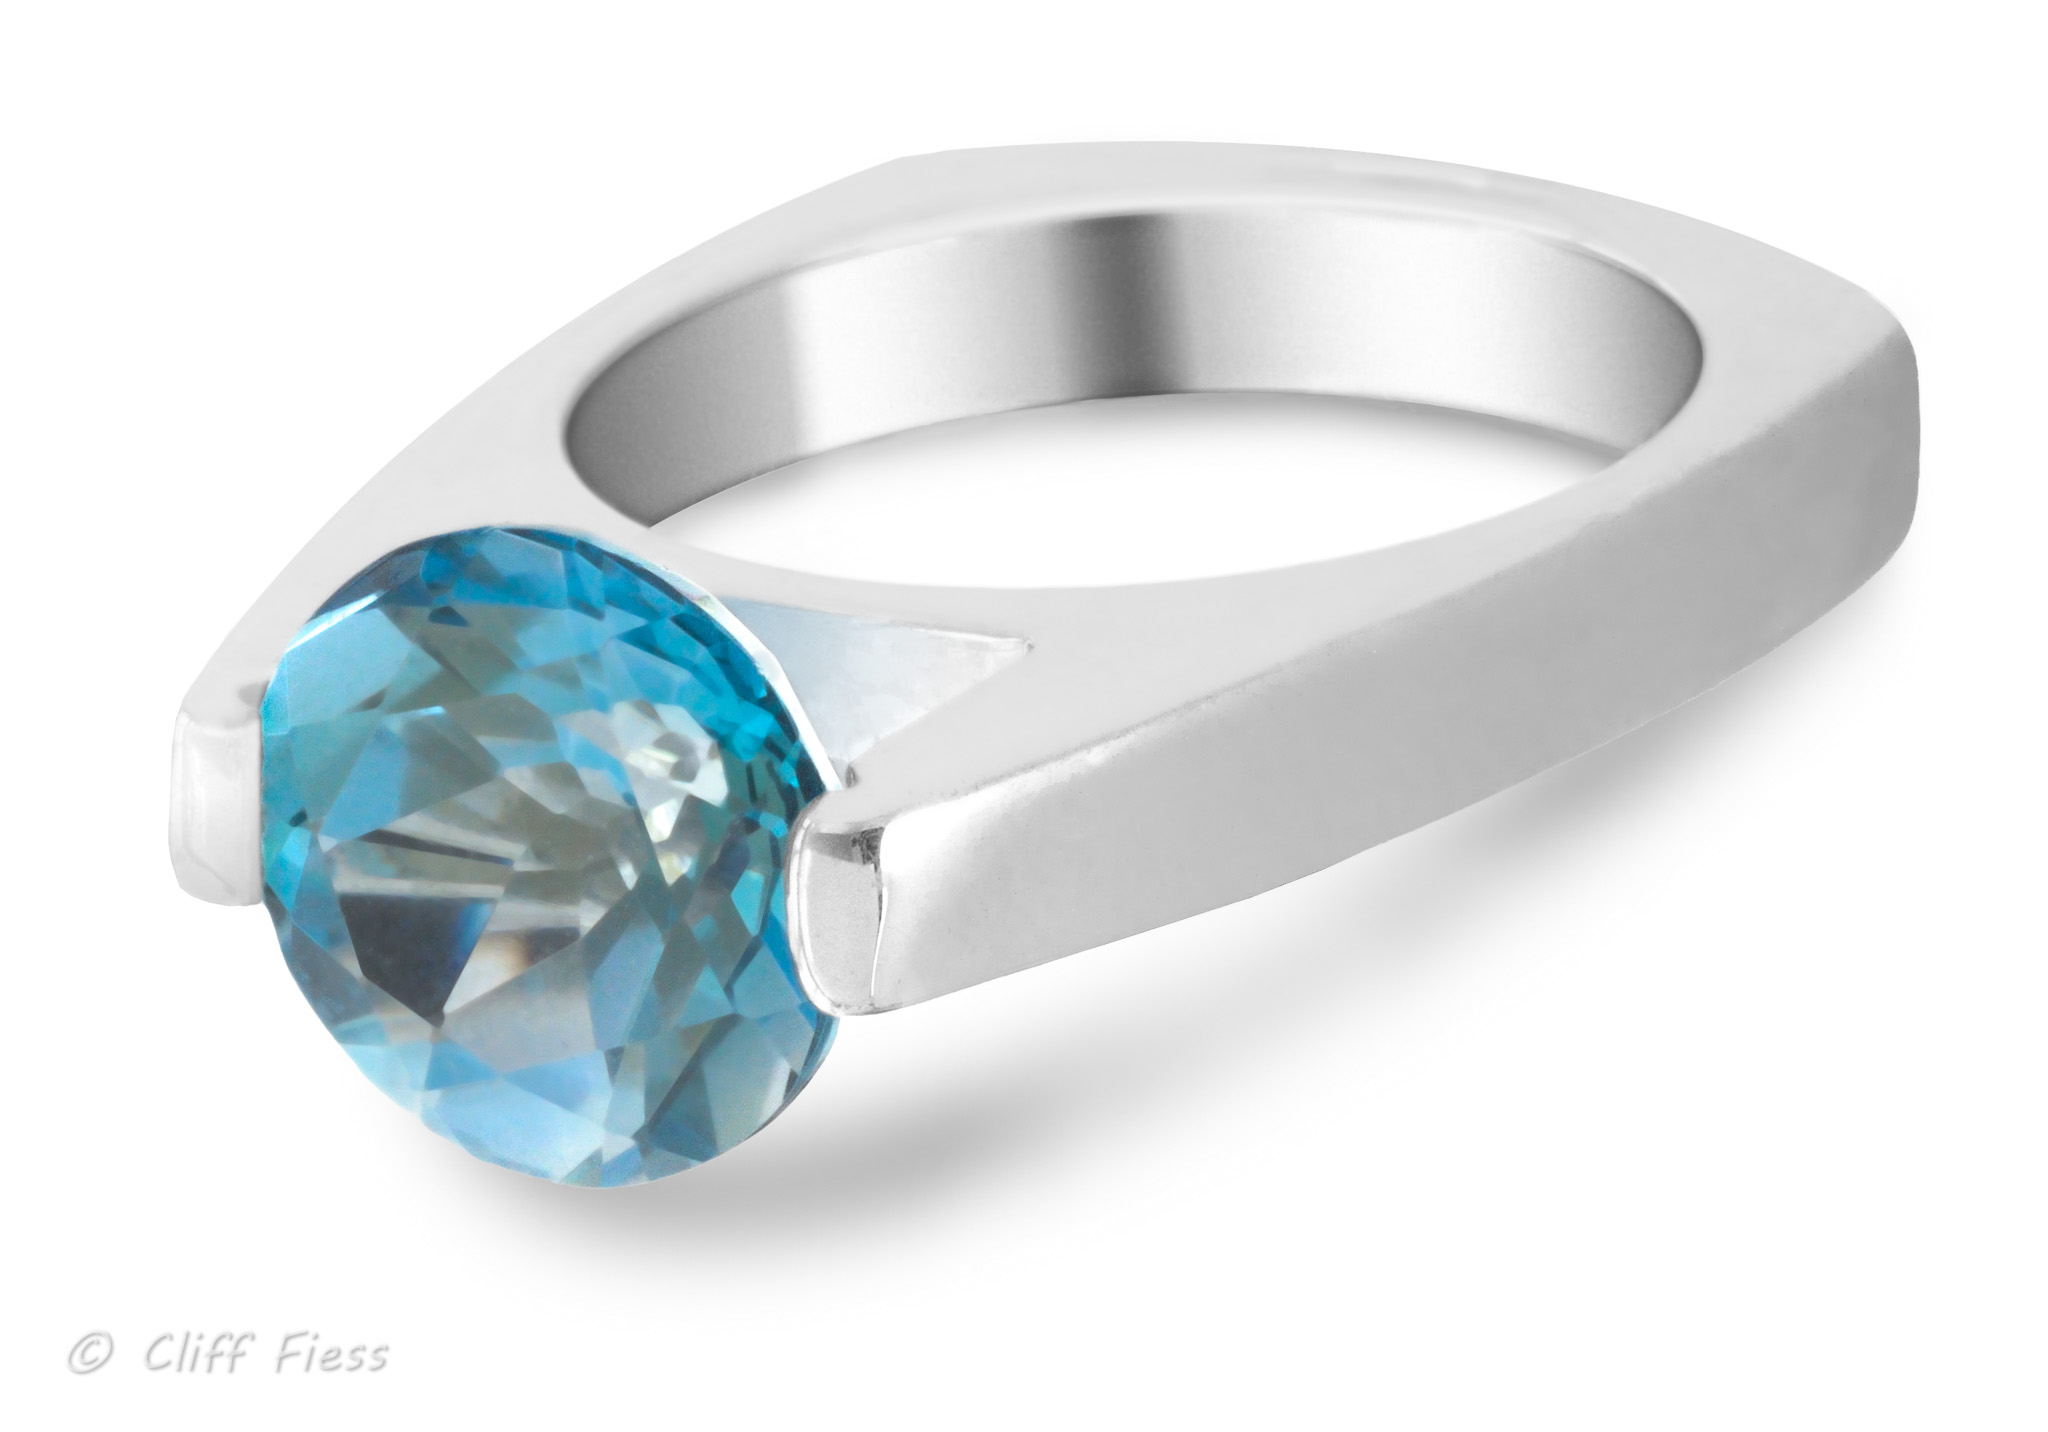 Sterling silver ring with a blue topaz gemstone